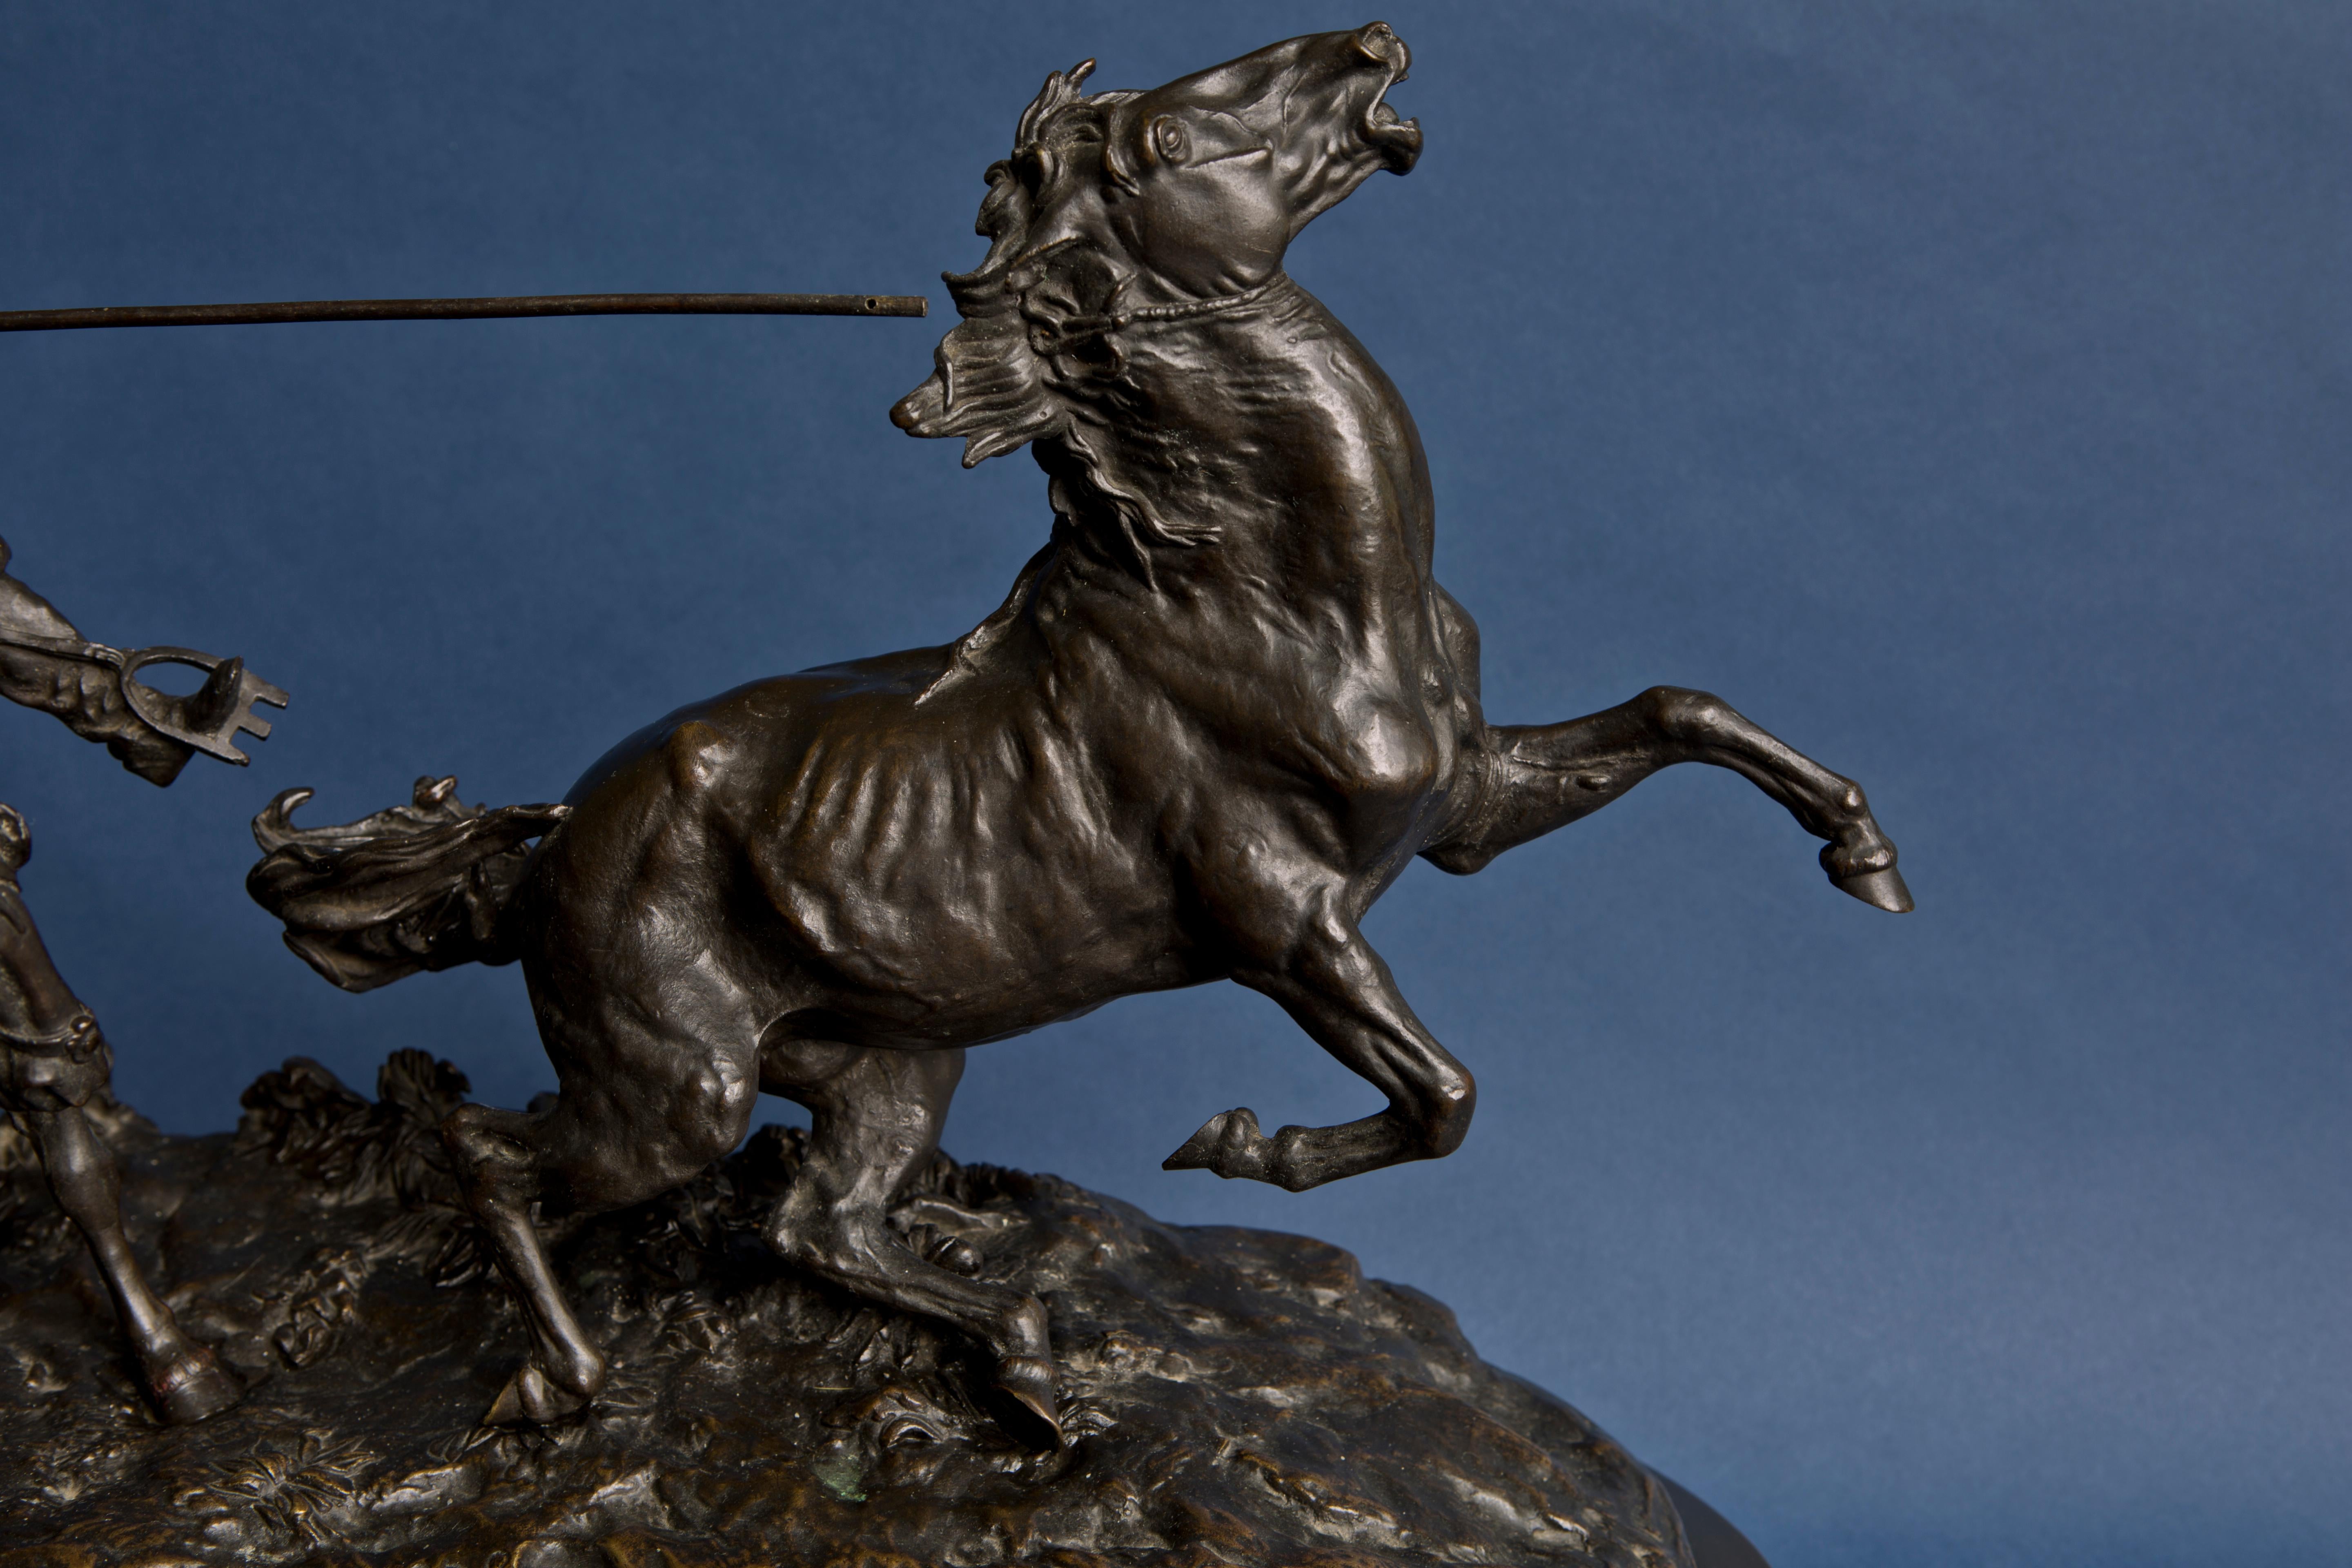 Bronze sculpture of a horse catching Russian farmer signed by Yevgueni Lanceray - Gold Figurative Sculpture by Yevgueni-Alex Lanceray  ( Evgeni Alexandrovich Lanceray )